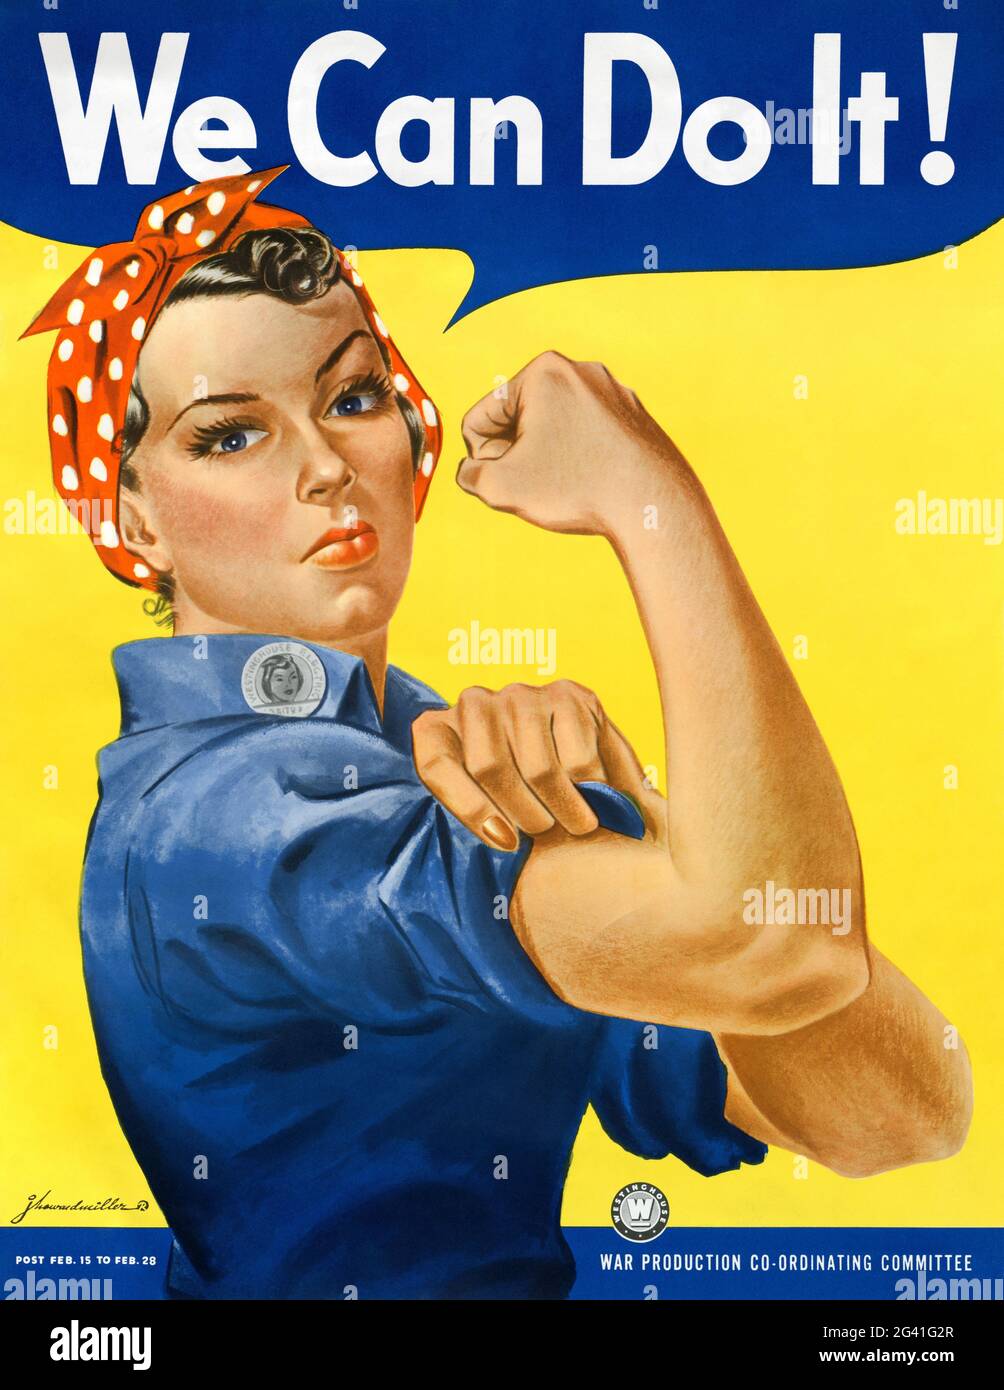 We can do it by John Howard Miller (1918-2004). Restored vintage poster published in 1942 in the USA. Stock Photo